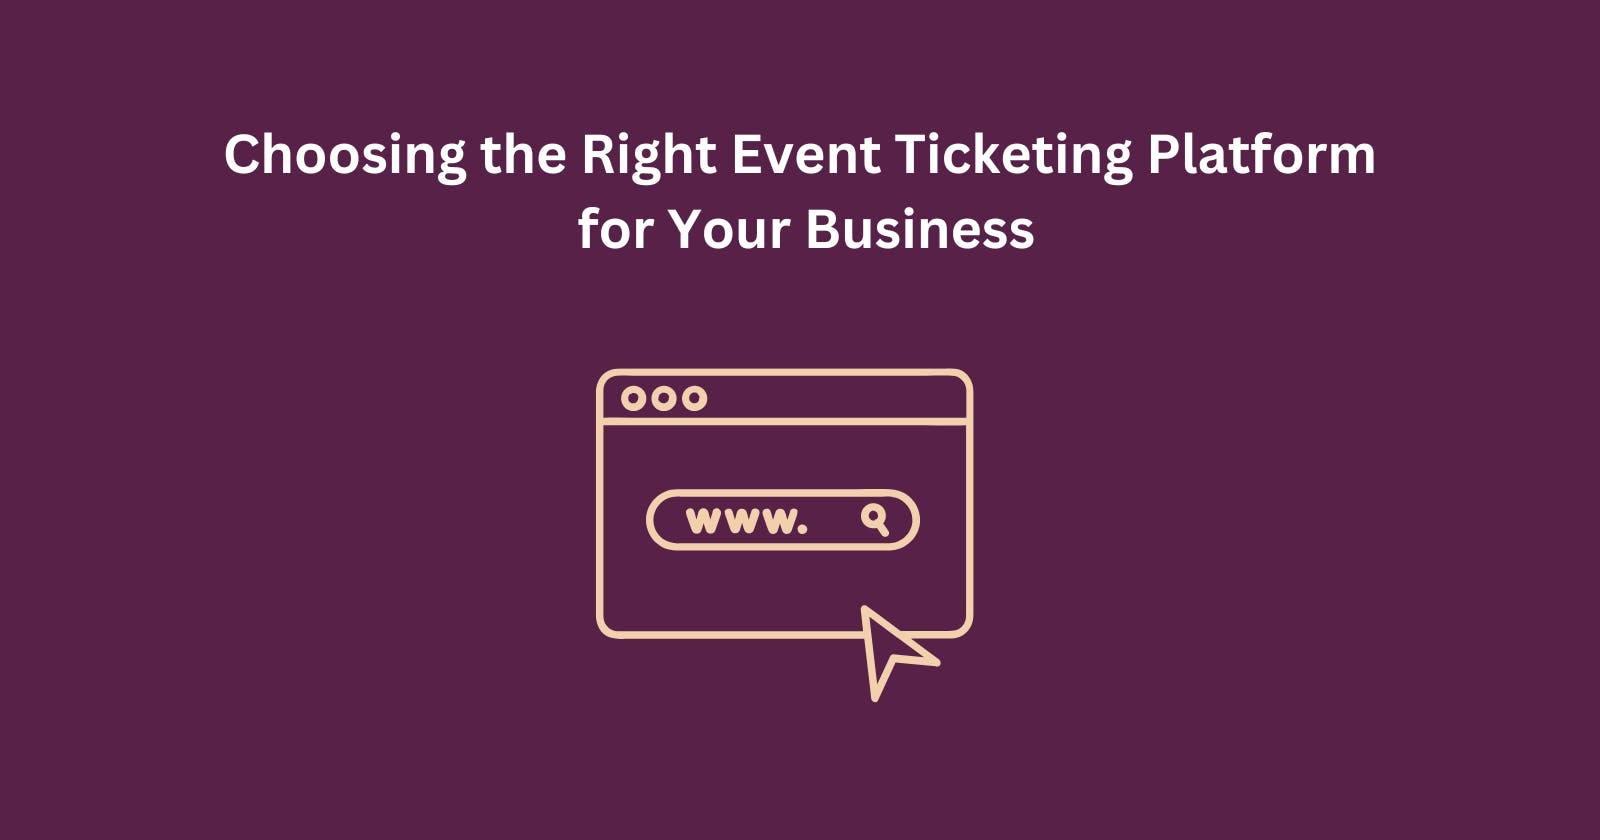 Choosing the Right Event Ticketing Platform for Your Business